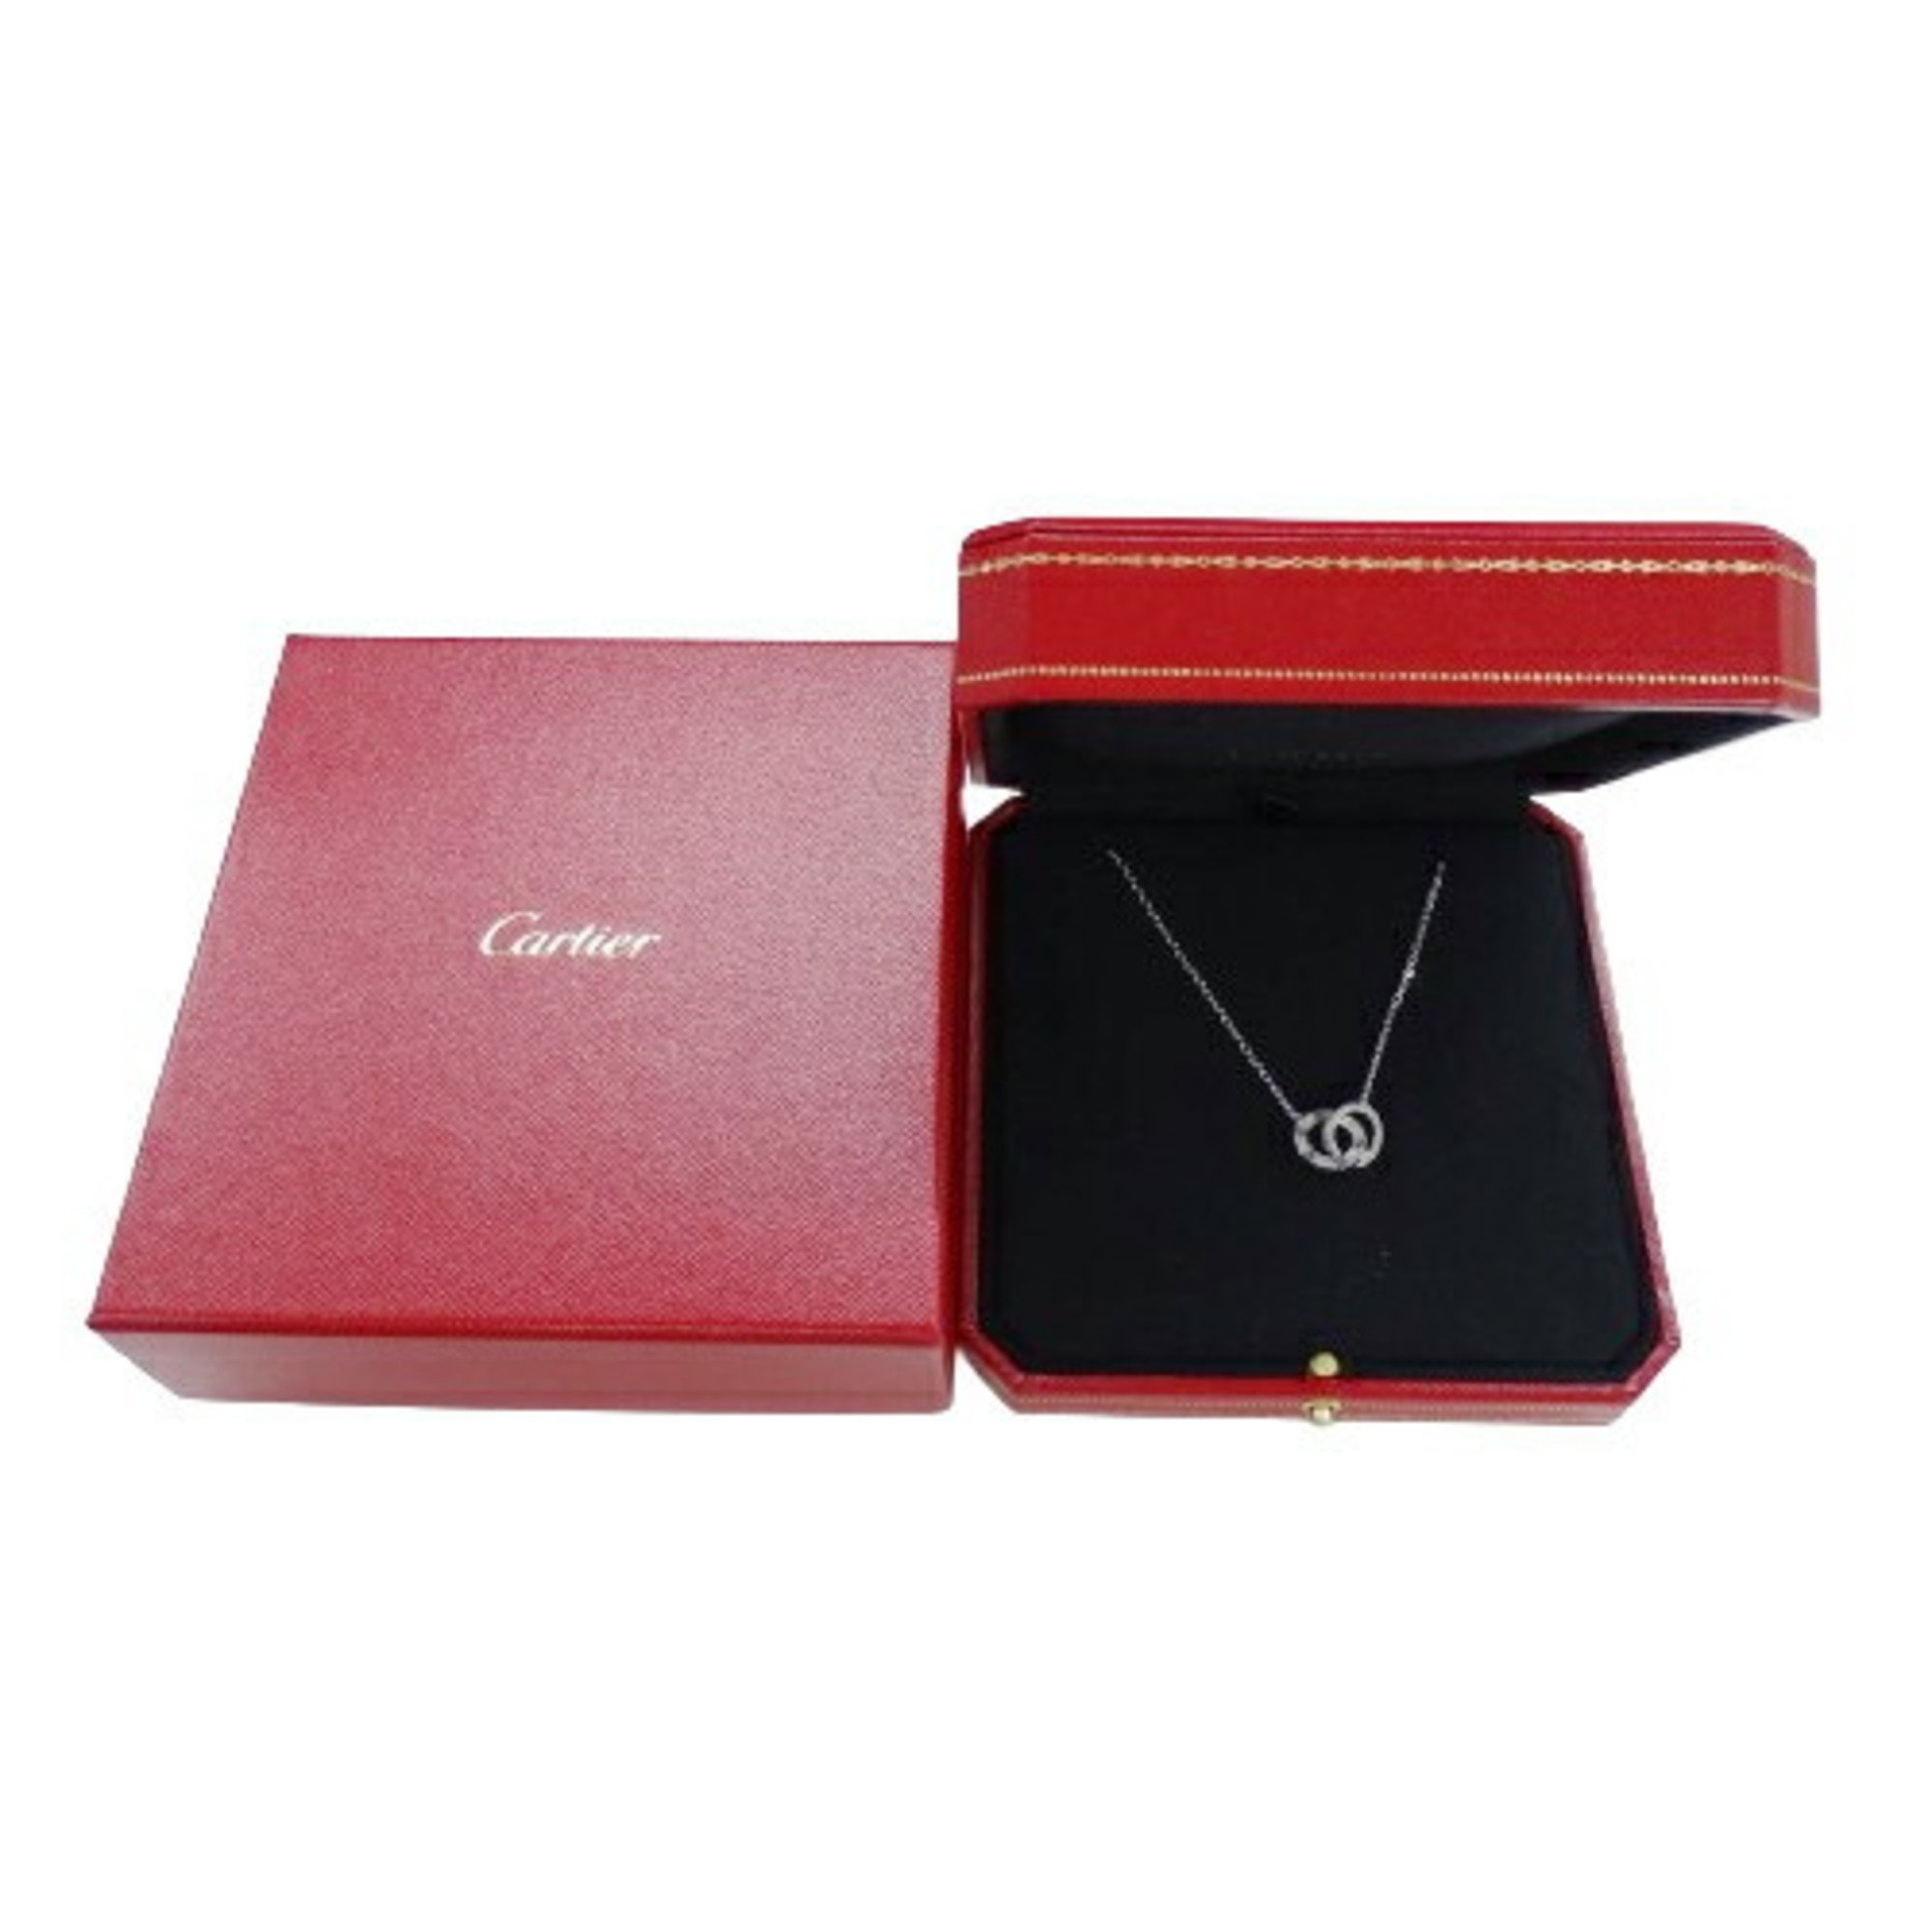 Cartier Necklace for Women 750WG Diamond Love Circle LOVE White Gold Polished